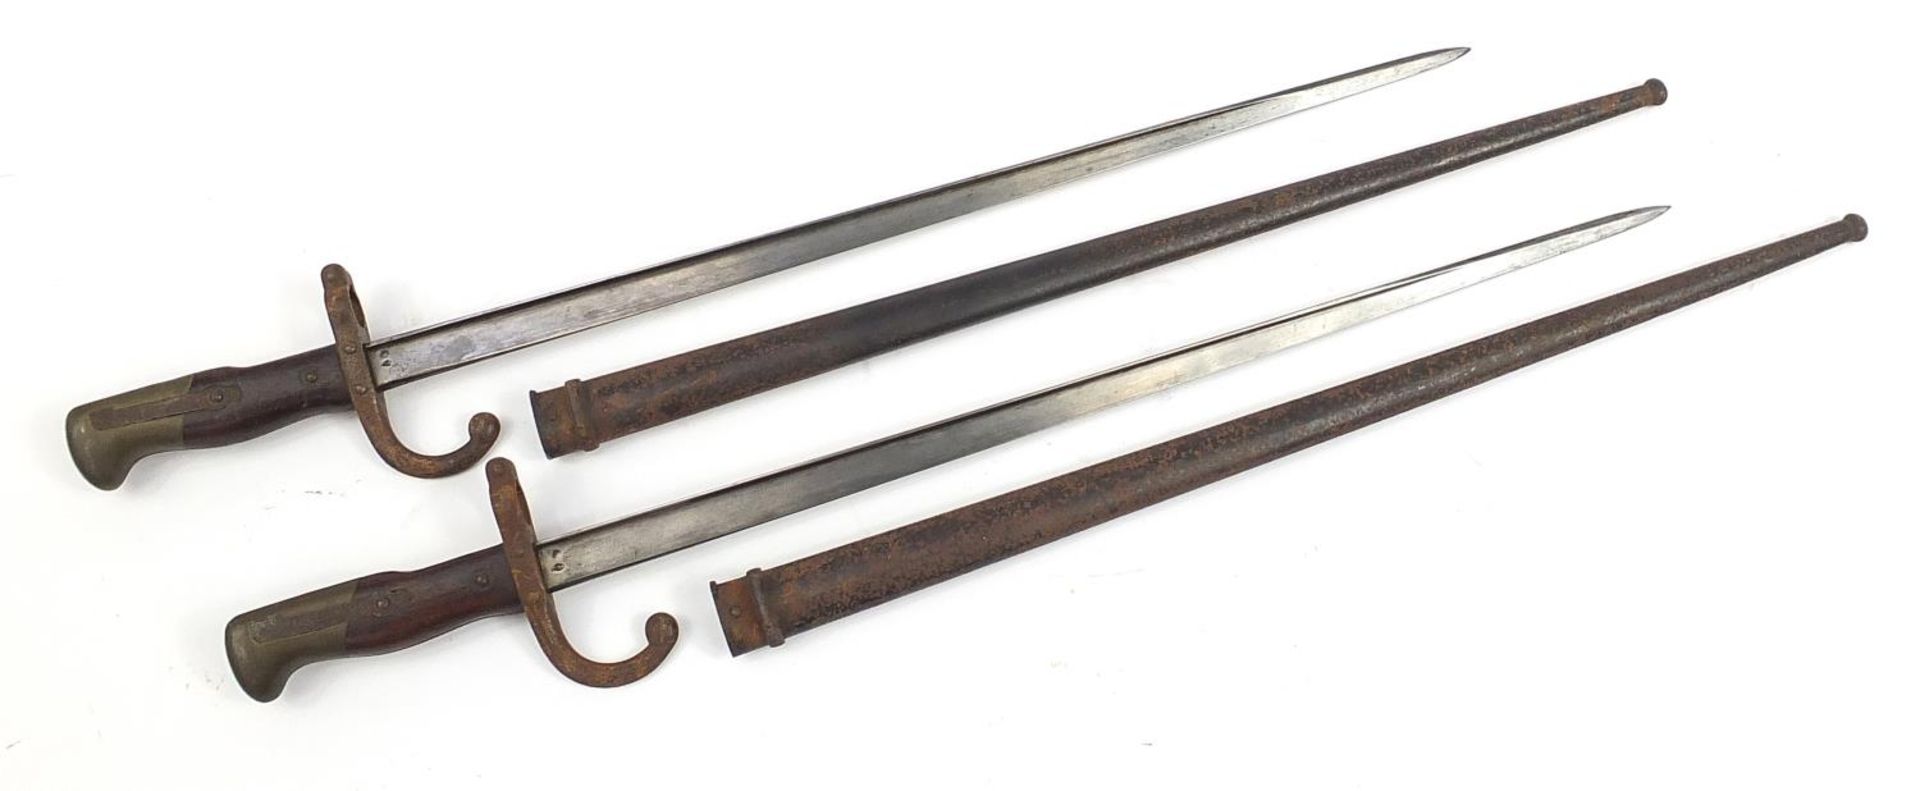 Pair of French military interest St Etienne bayonets with scabbards, each 66cm in length - Image 5 of 9